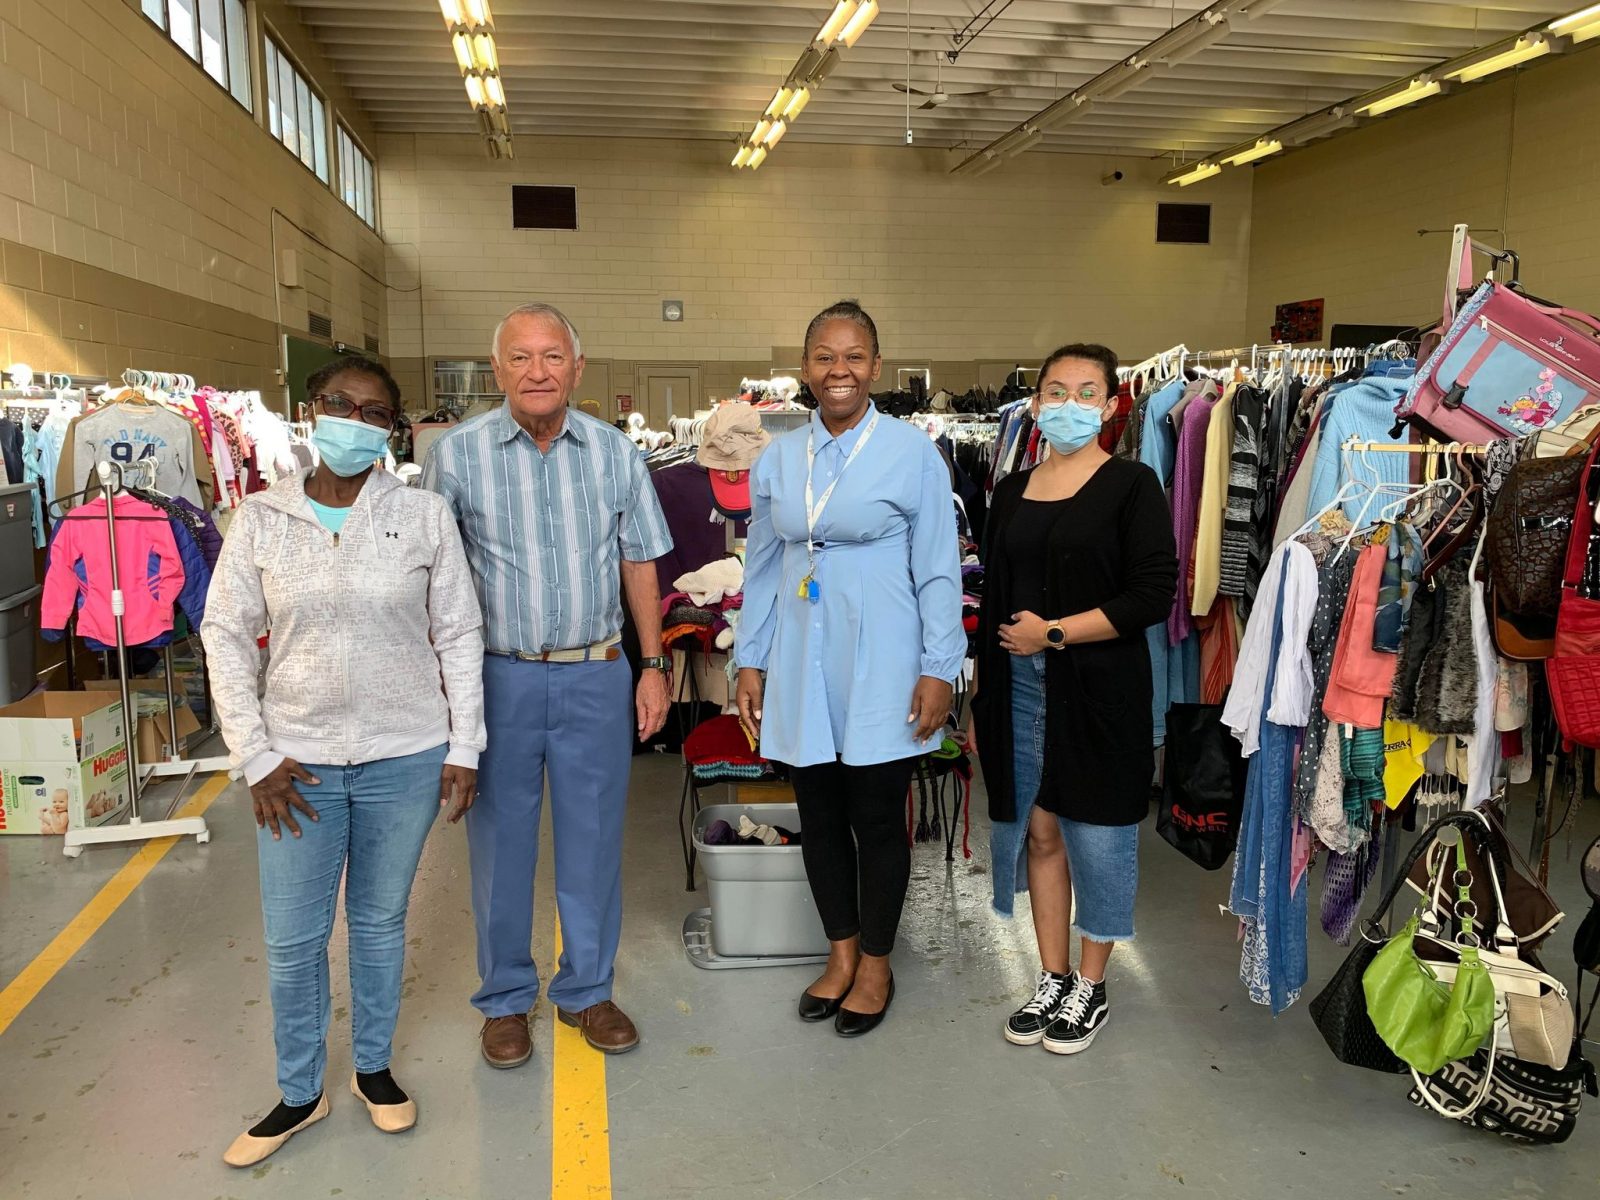 ACFO SDG Seeking Community’s Help with Winter Clothing for Refugees